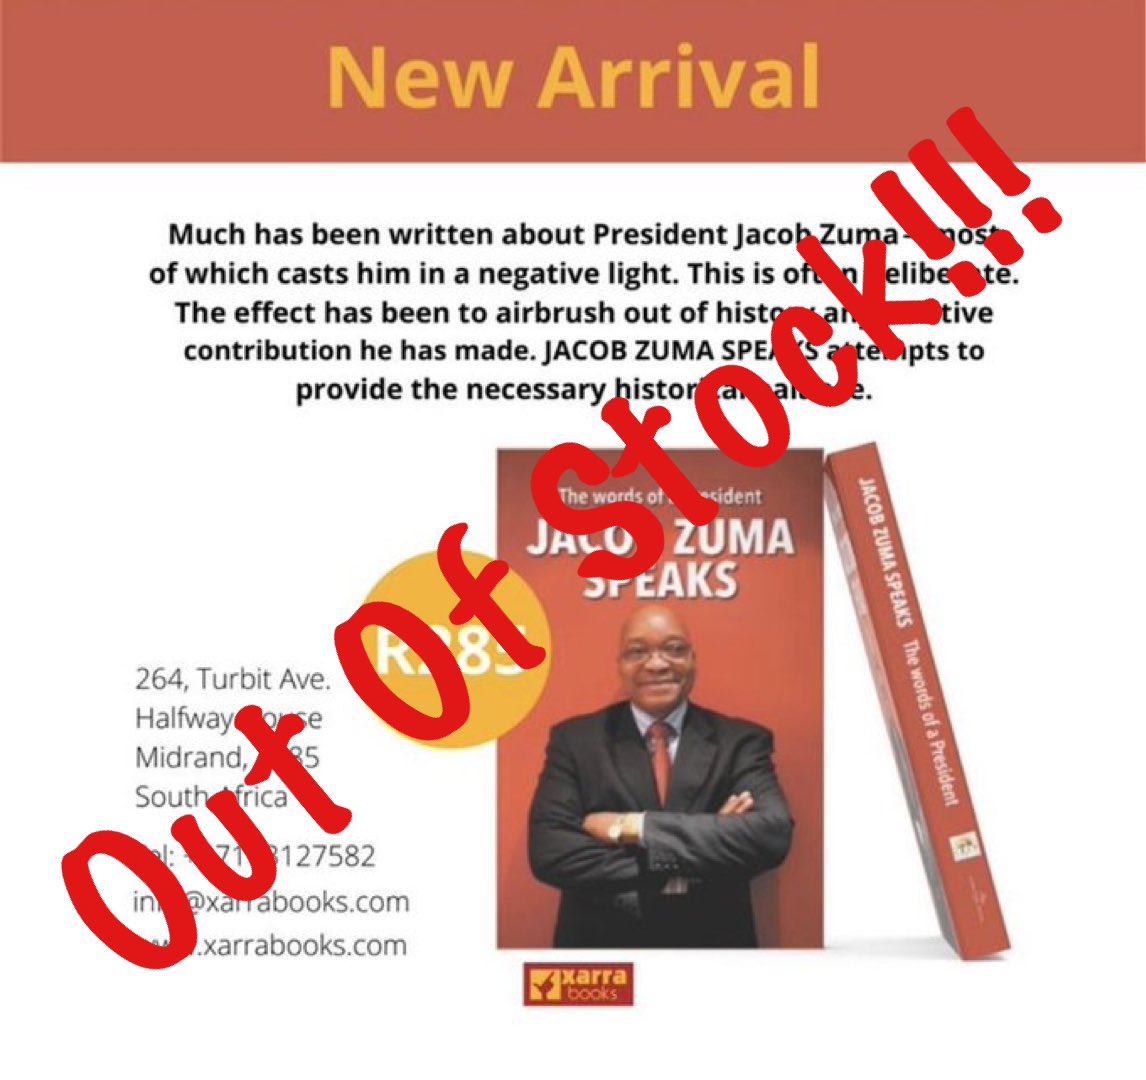 We Apologise. We Are Out Of Stock. Some Book Shops Are Calling For The Book. We Have Pre-orders For Over 2000. Please Be Patient With Us. #PresidentZumaSpeaks